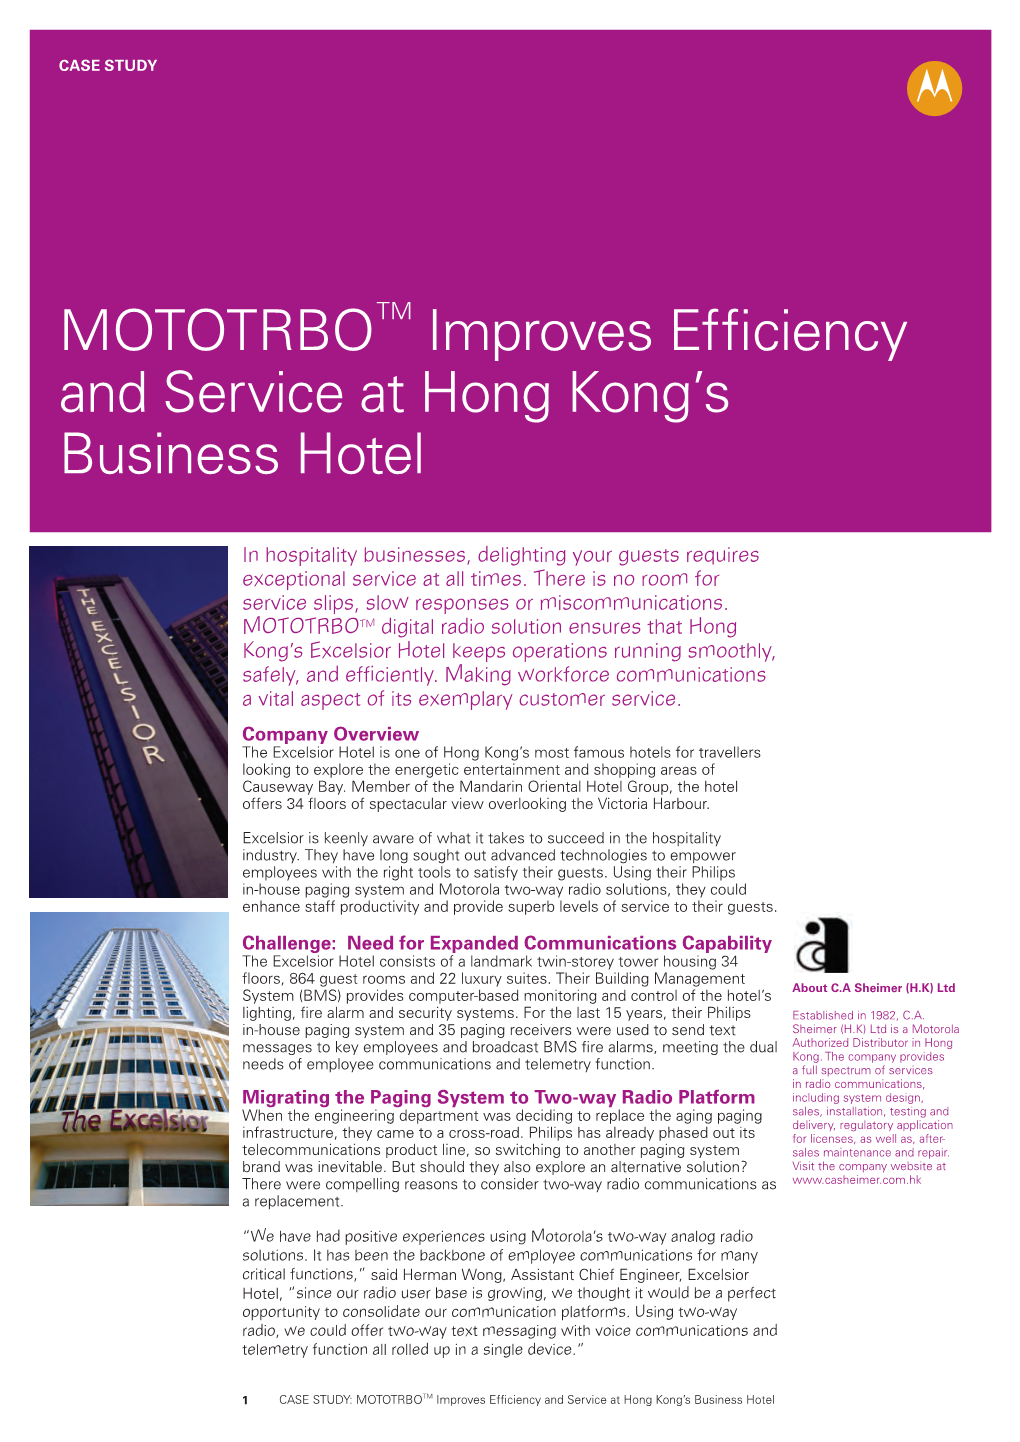 MOTOTRBO Improves Efficiency and Service at Hong Kong's Business Hotel